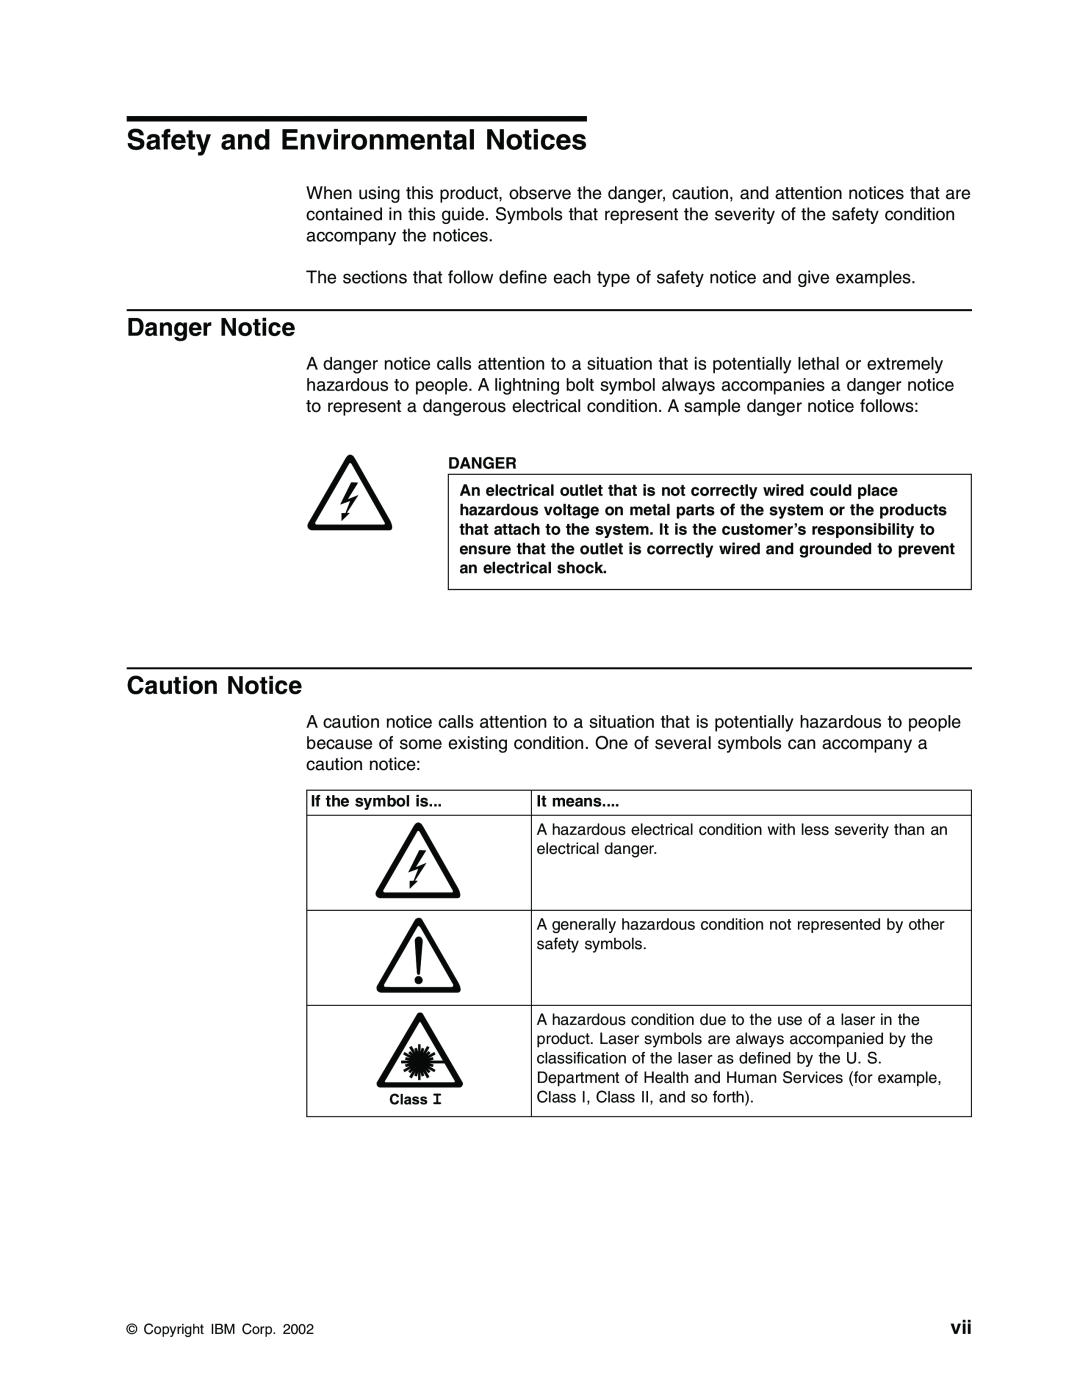 IBM T400F manual Safety and Environmental Notices, Danger Notice, Caution Notice 